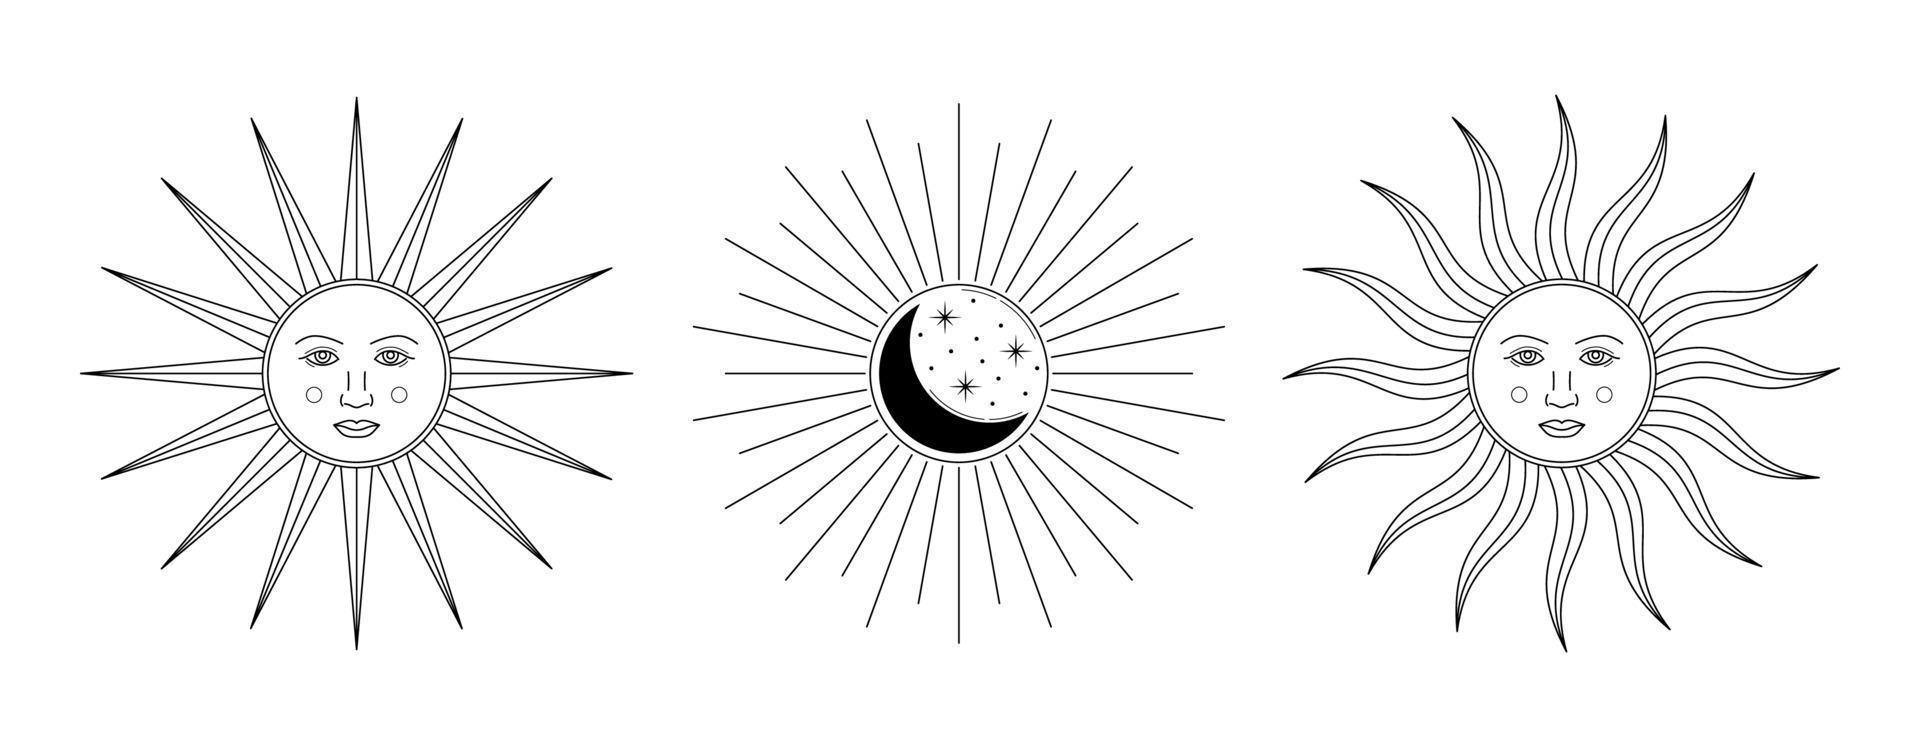 Vector linear sun faces vintage design. Isolated outline sun and crescent on white background